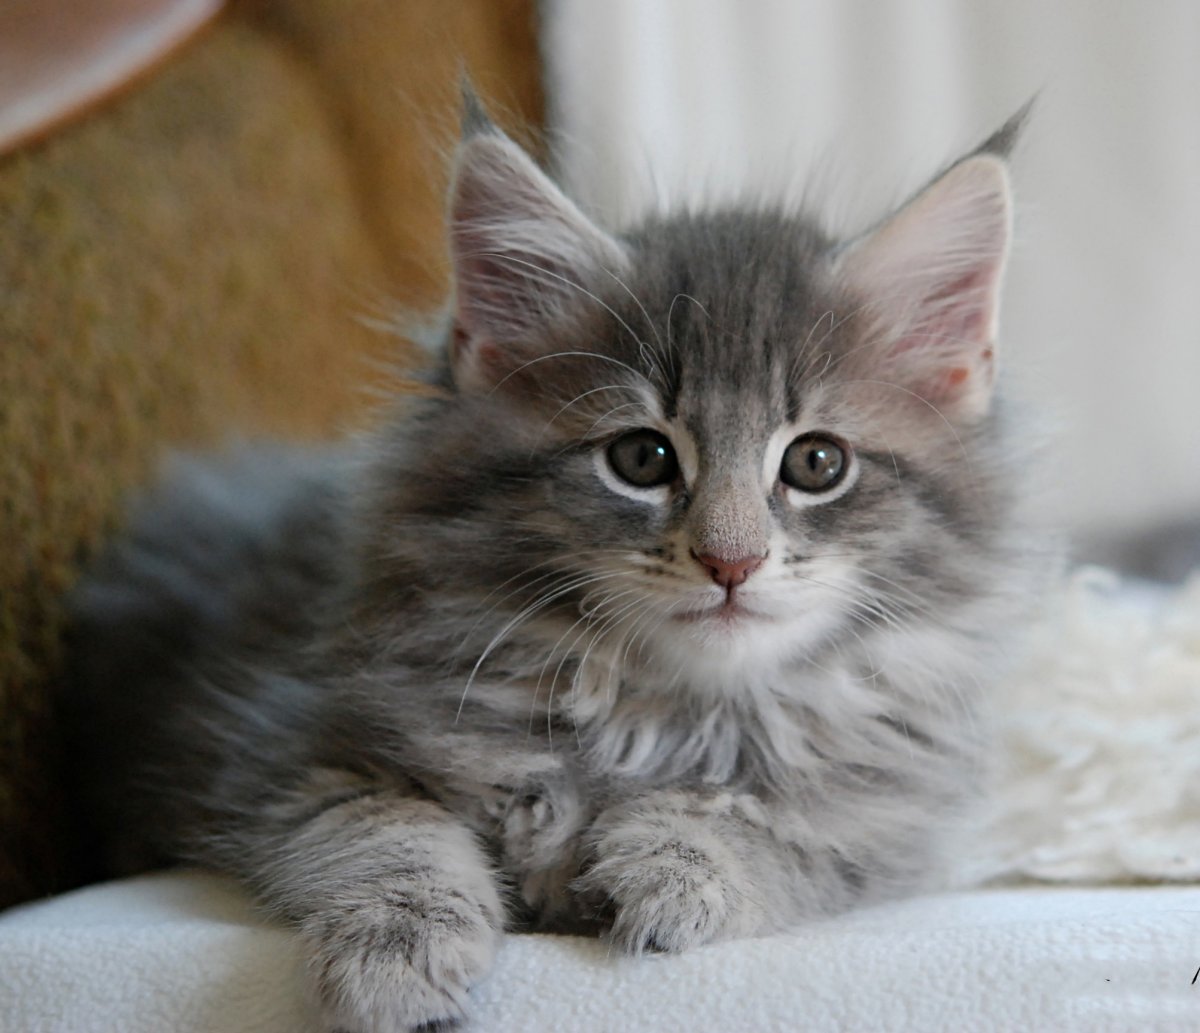 Norwegian forest kittens for adoption in Raanan: Explore the majestic beauty of nature.